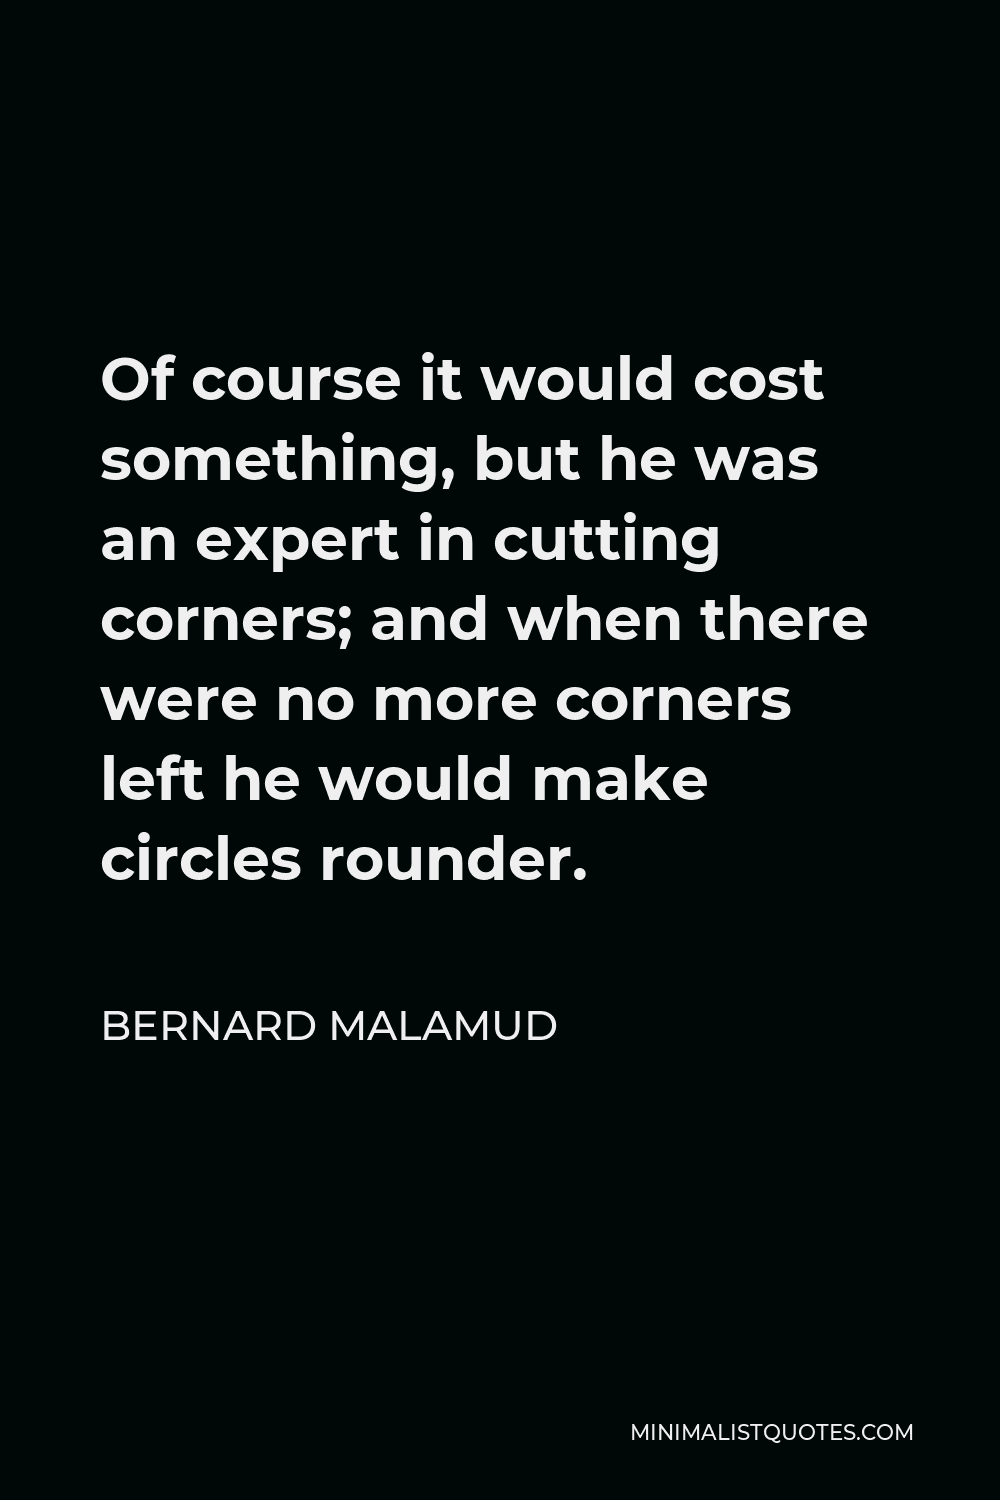 Bernard Malamud Quote - Of course it would cost something, but he was an expert in cutting corners; and when there were no more corners left he would make circles rounder.